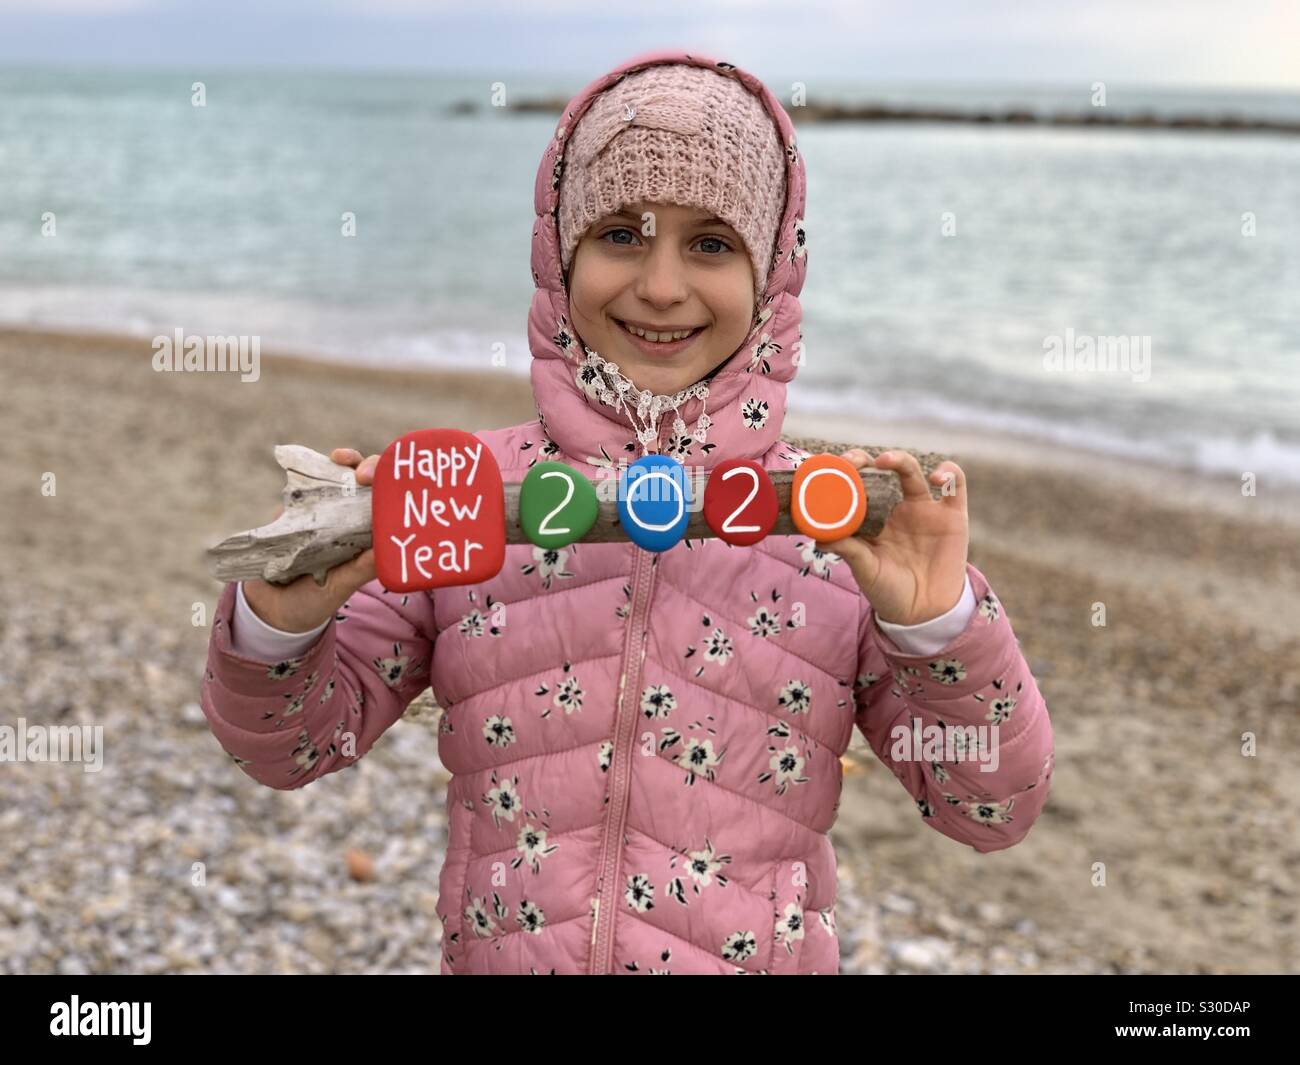 Happy New Year 2020 with a child holding a creative colorful stones composition at the beach Stock Photo